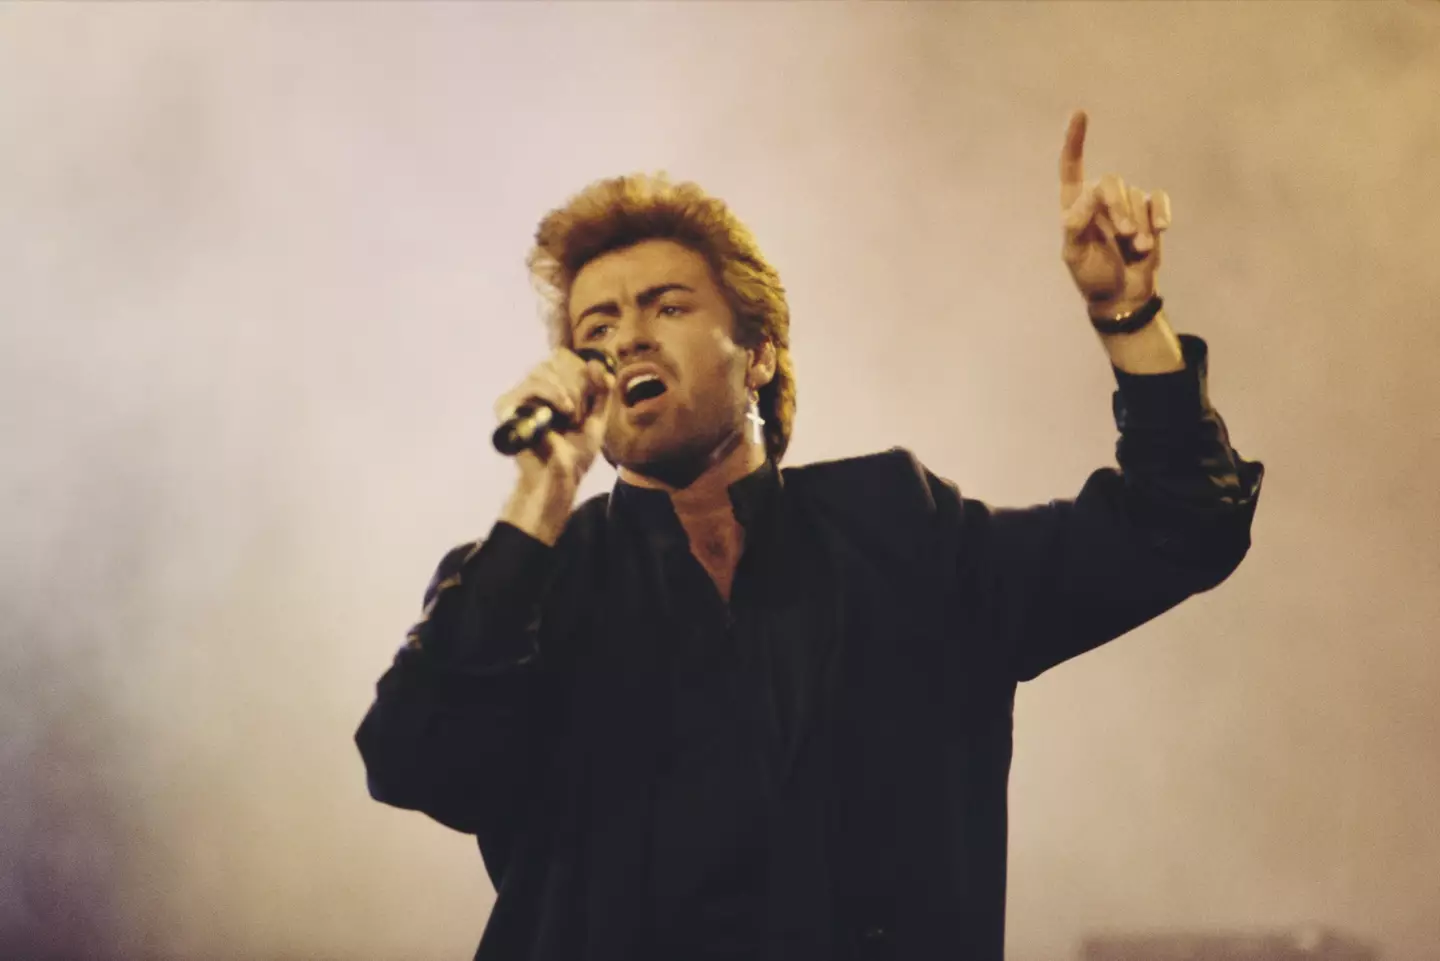 The film will follow the legendary singer/songwriter from his early career in Wham! to his final days.